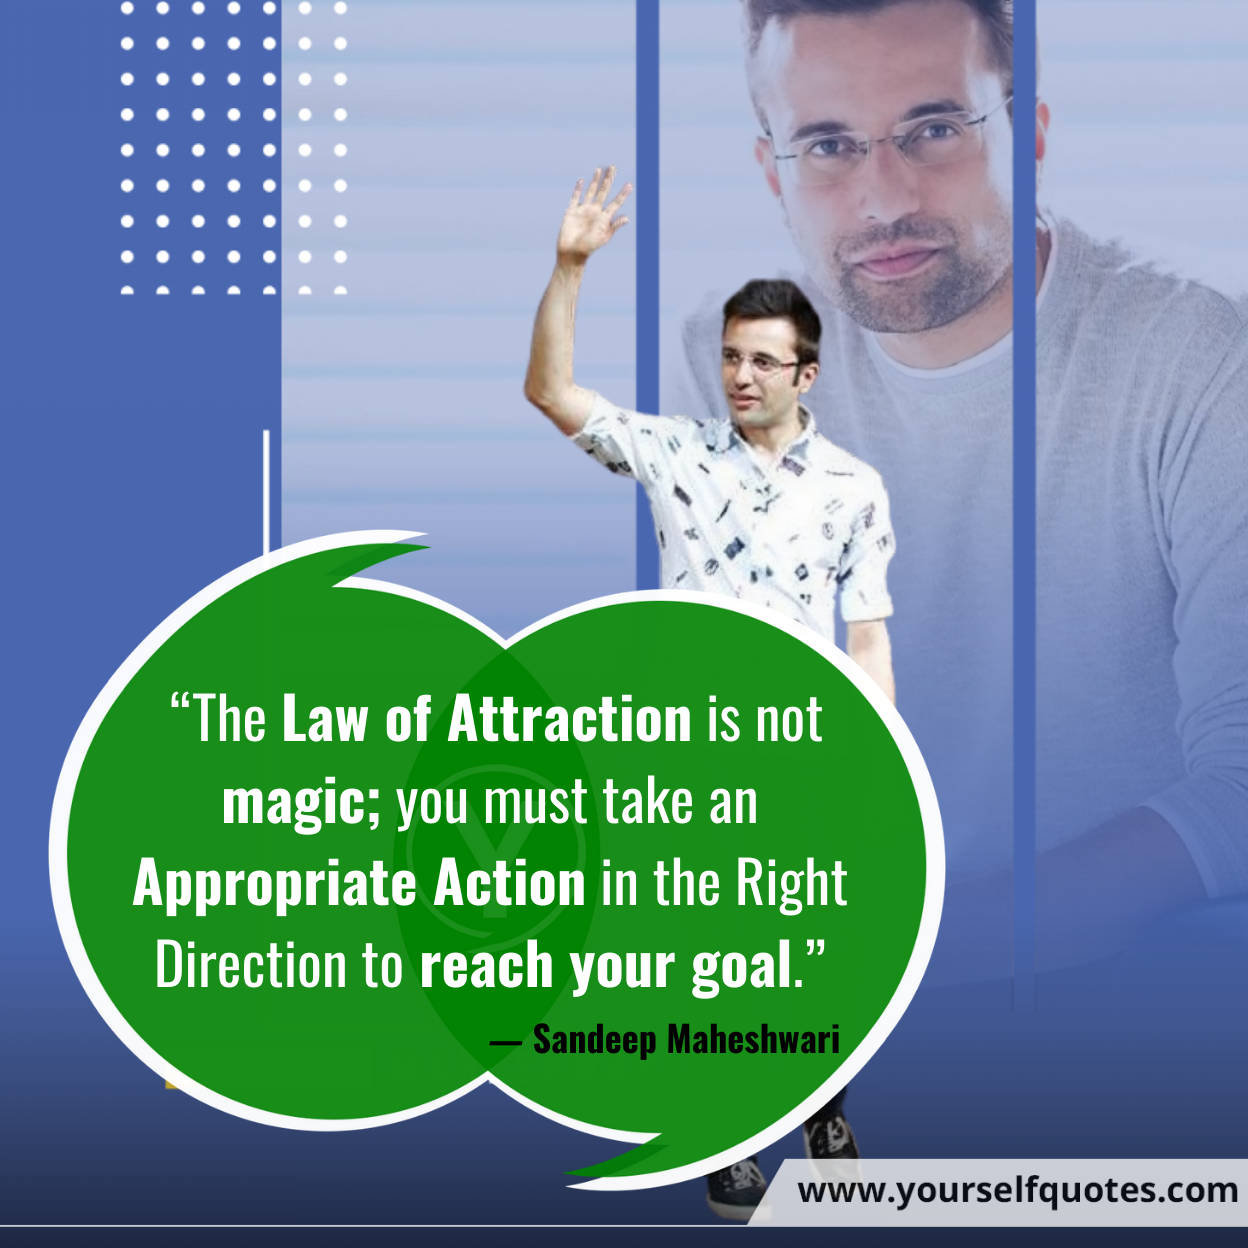 Law of Attraction Quotes by Sandeep Maheshwari